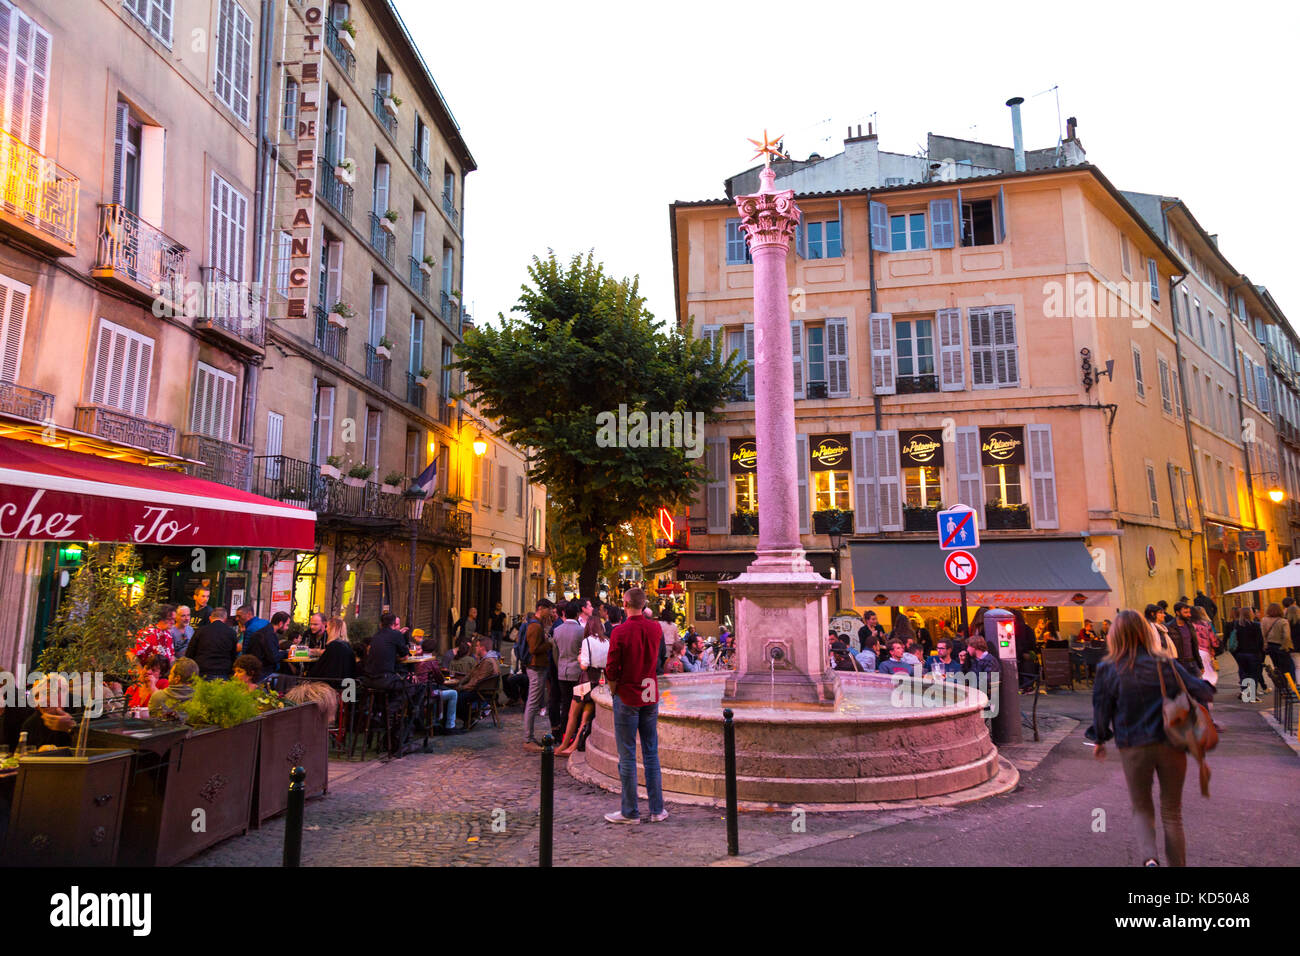 People sitting outside restaurants and bars, lively atmosphere at Place des Augustins, Aix en Provence, France Stock Photo